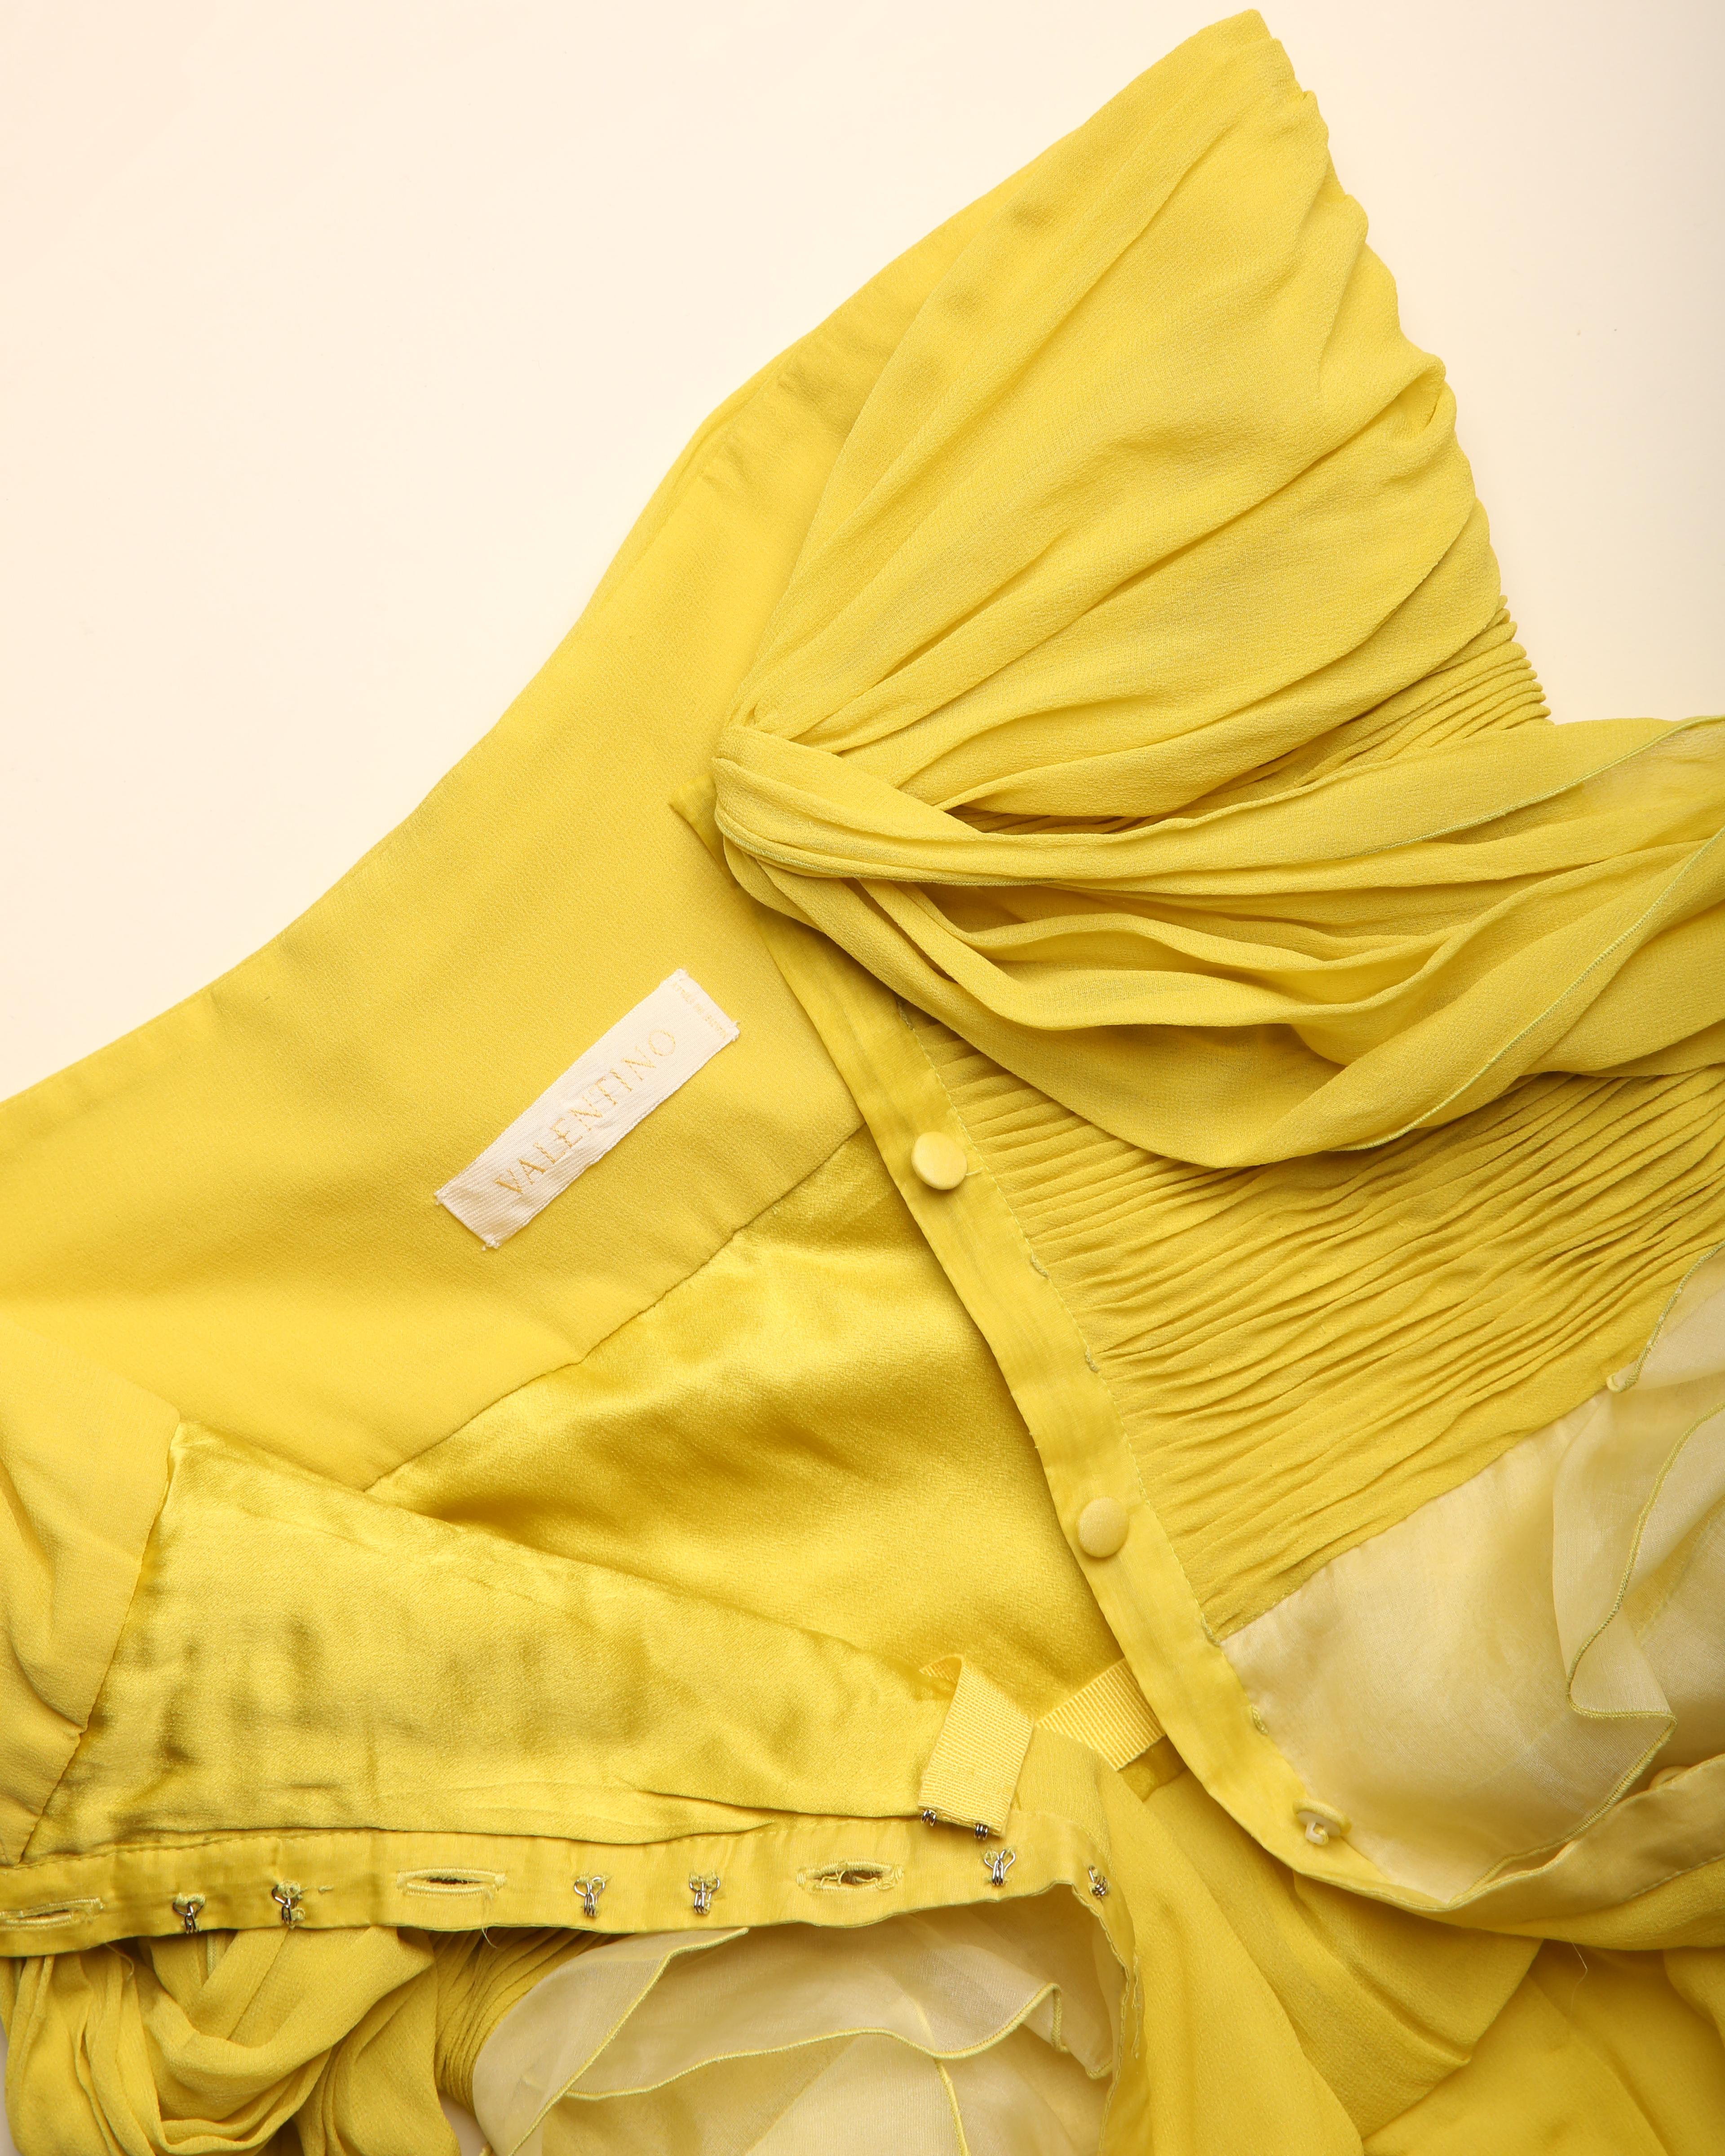 Valentino S/S 2005 yellow chartreuse strapless ruffle bustier silk gown dress 8